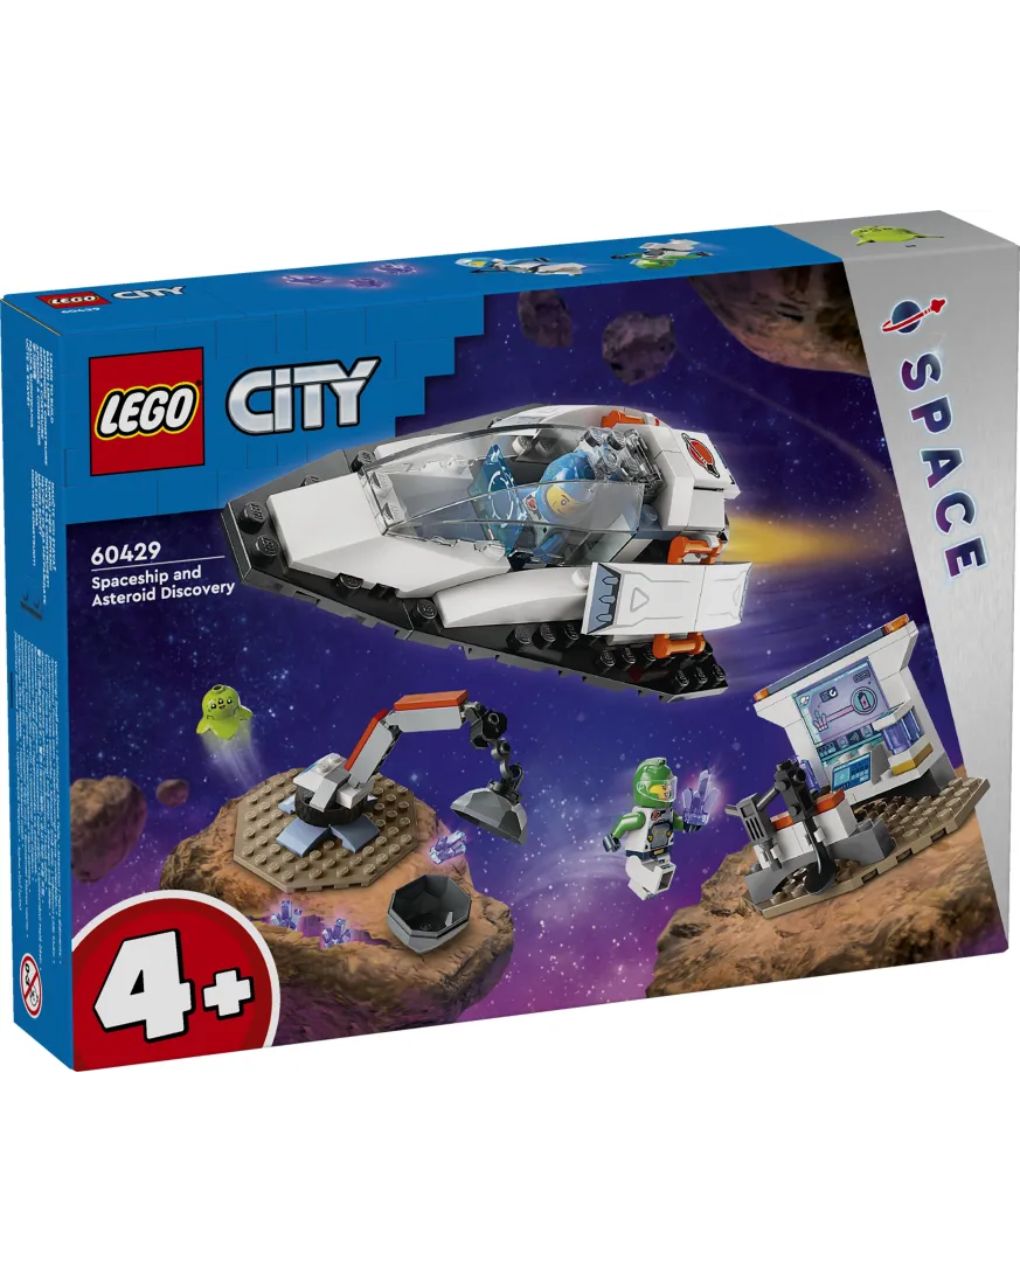 Lego city spaceship & asteroid discovery 60429